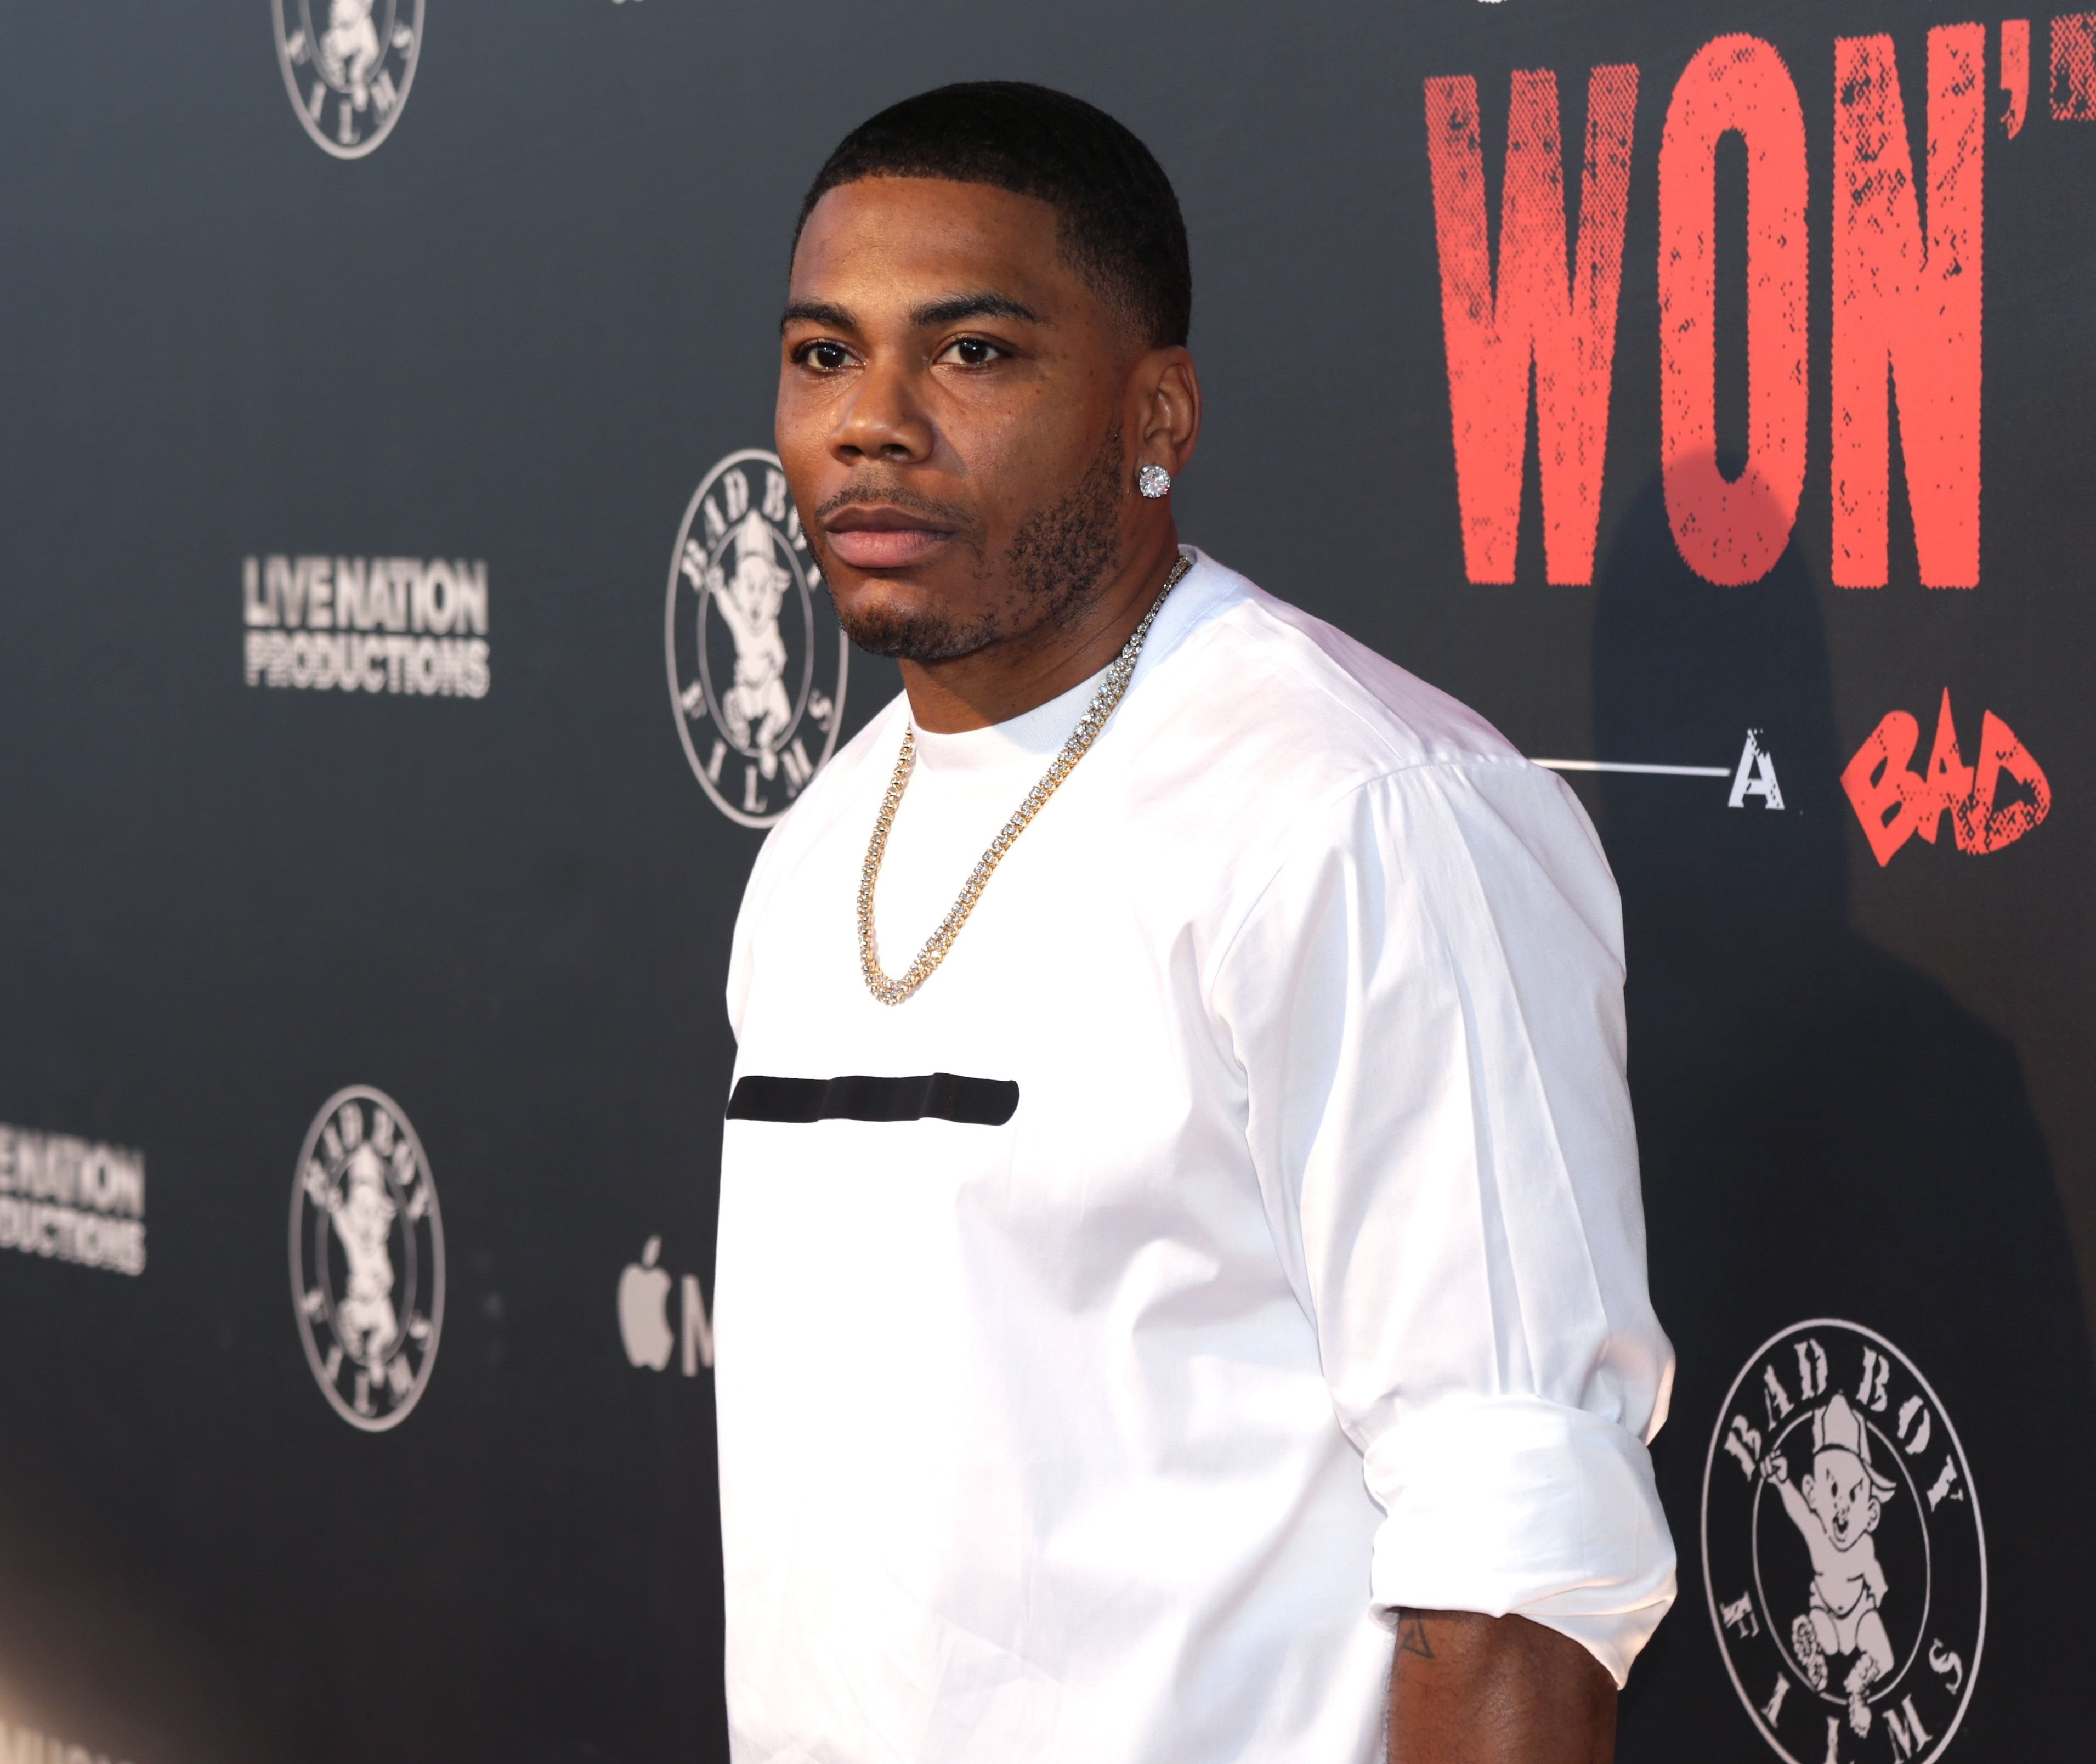 Nelly at the premiere of "Can't Stop Won't Stop" on June 21, 2017 | Photo: Getty Images